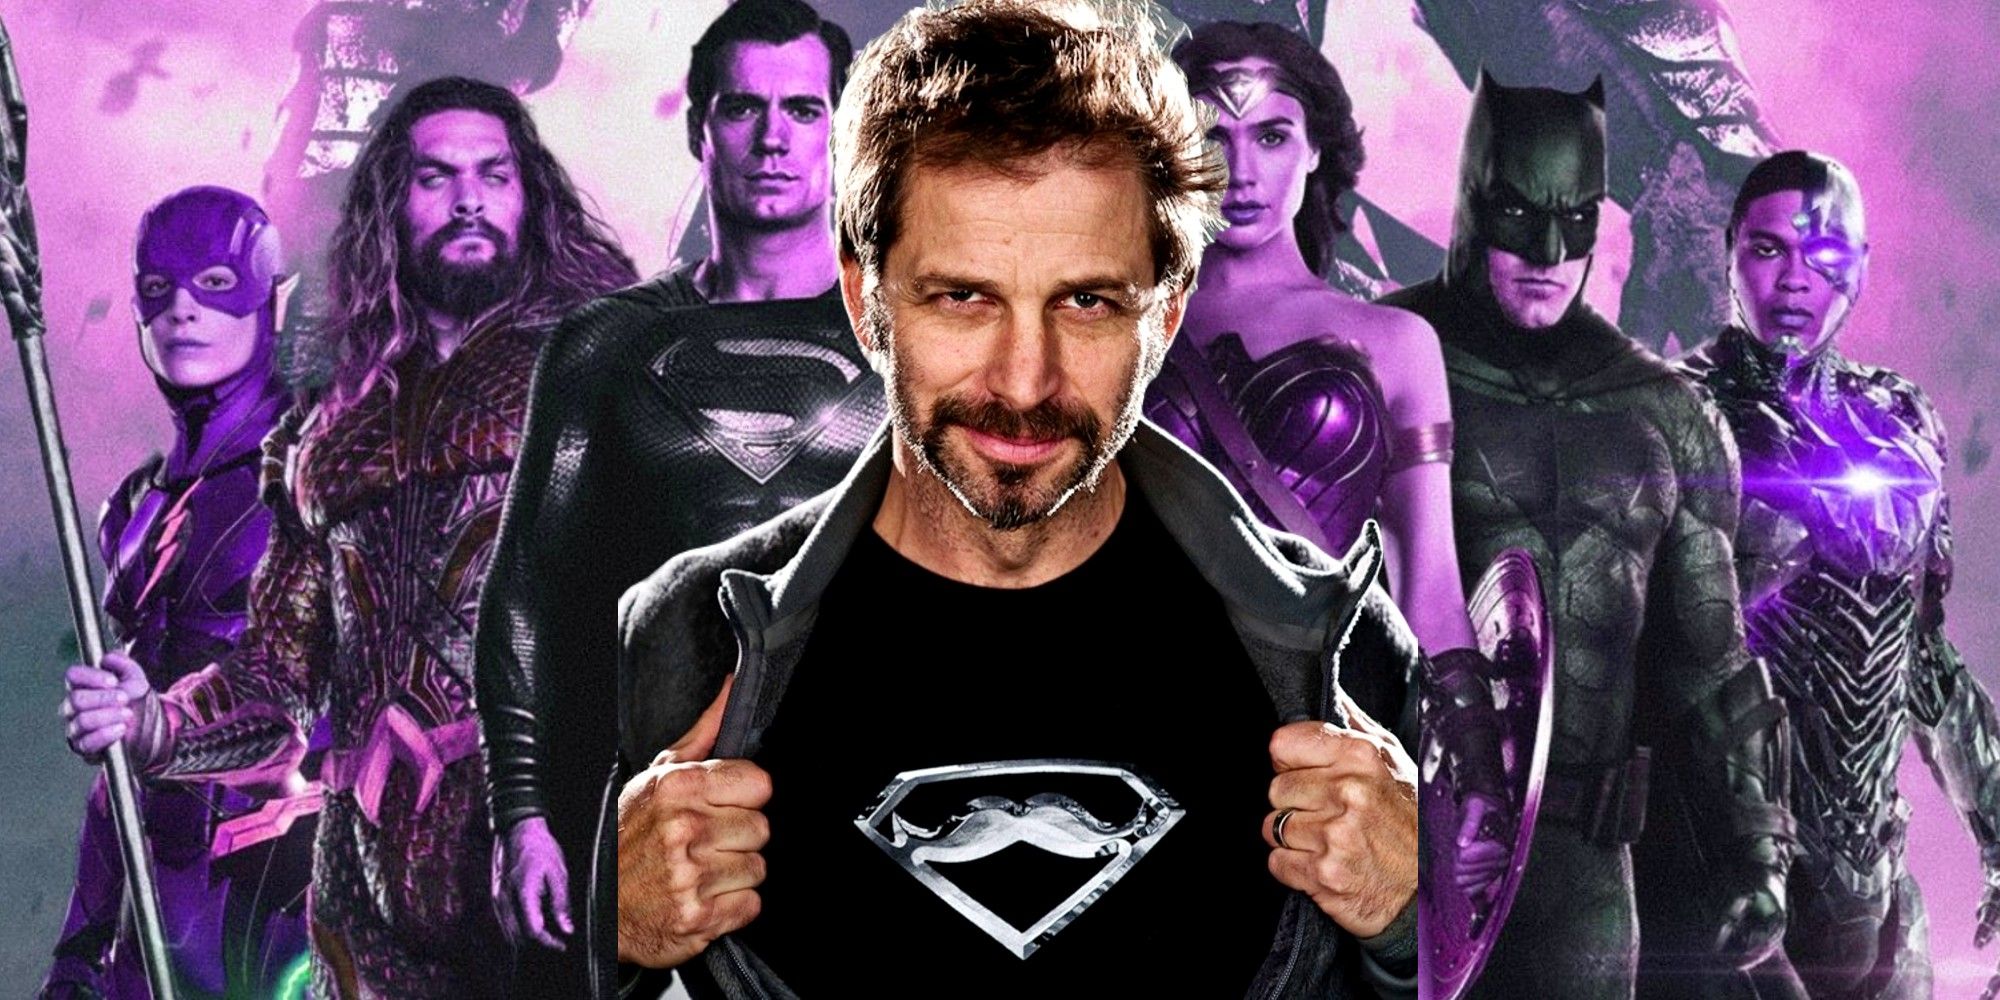 snyderverse netflix petition reasons - blended image with Zack Snyder standing in front of the justice league